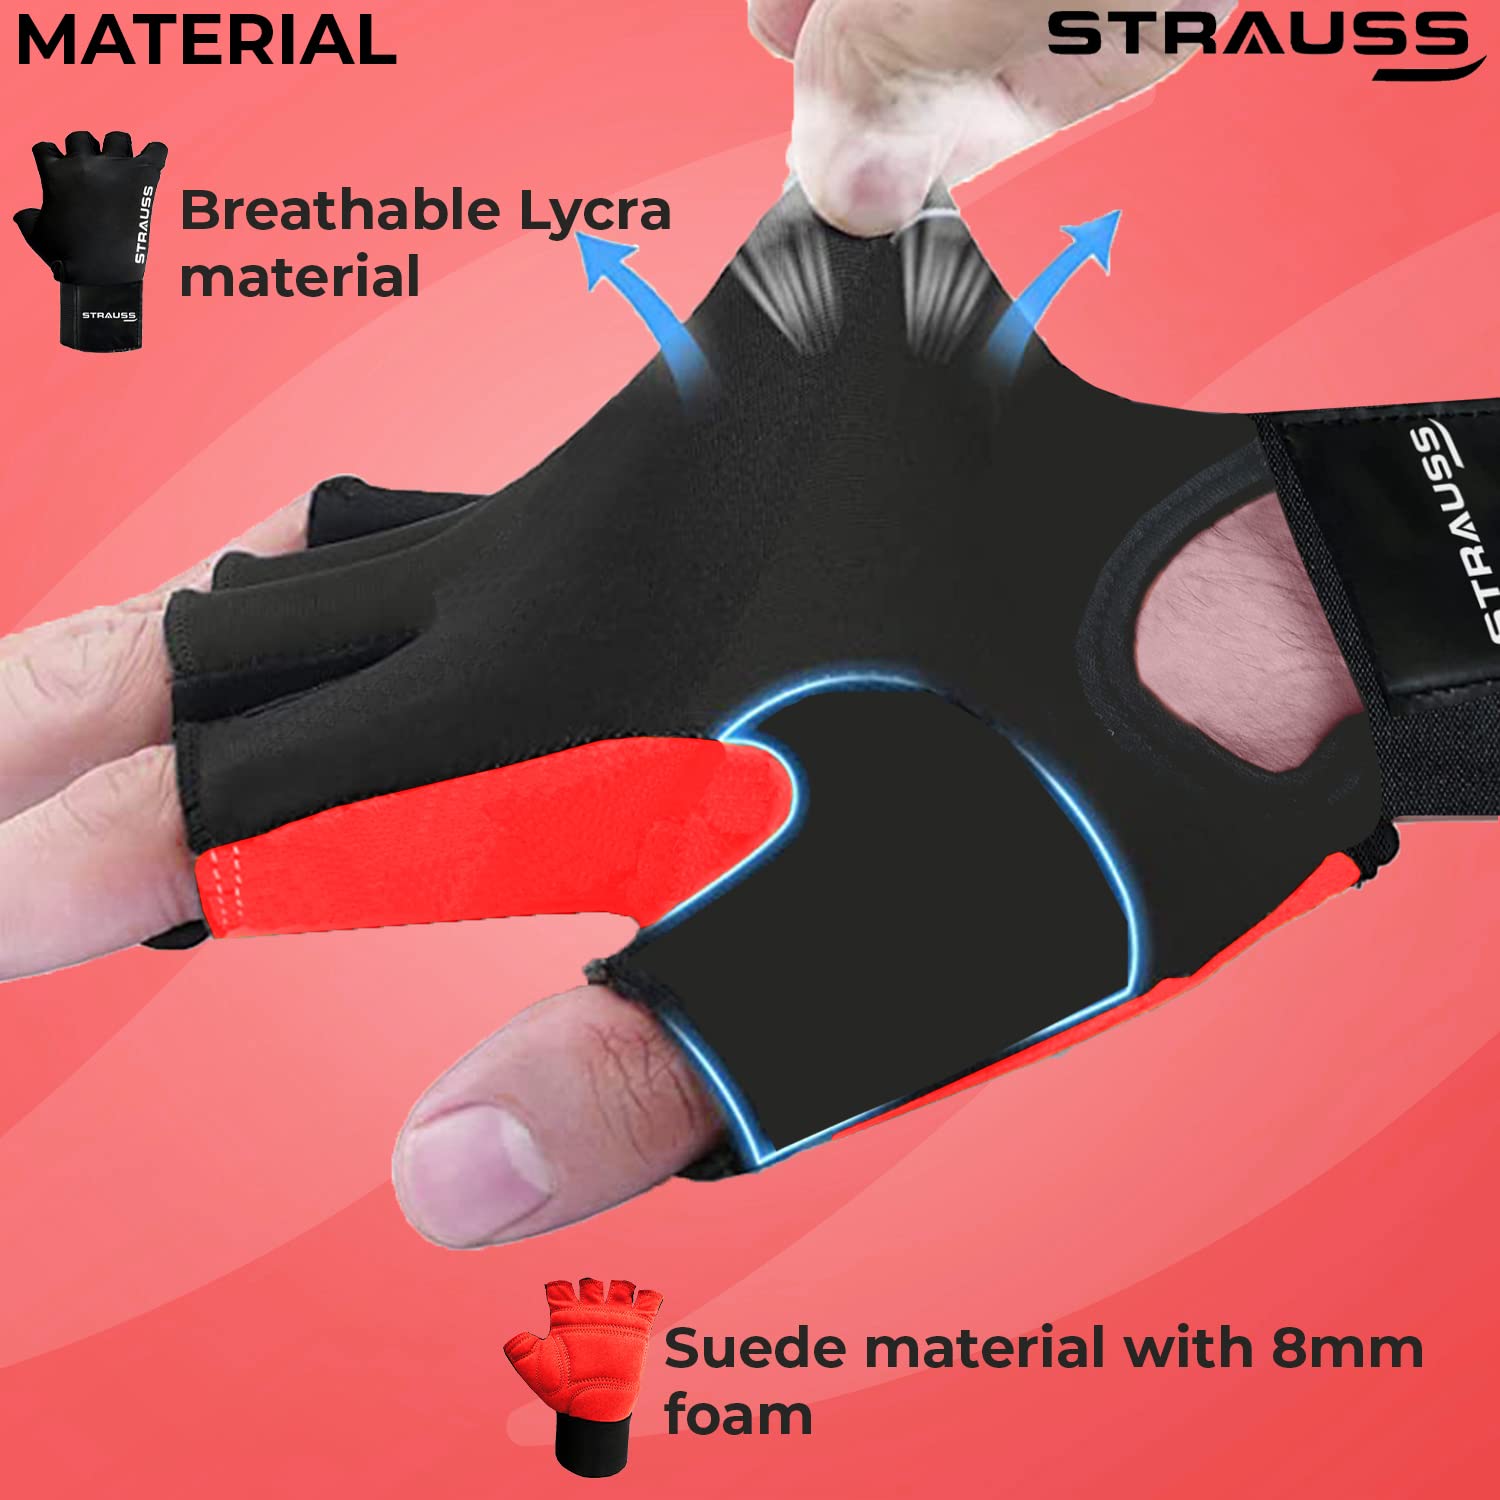 STRAUSS Suede Gym Gloves for Weightlifting, Training, Cycling, Exercise & Gym | Half Finger Design, 8mm Foam Cushioning, Anti-Slip & Breathable Lycra Material, (Red/Black), (Extra Large)